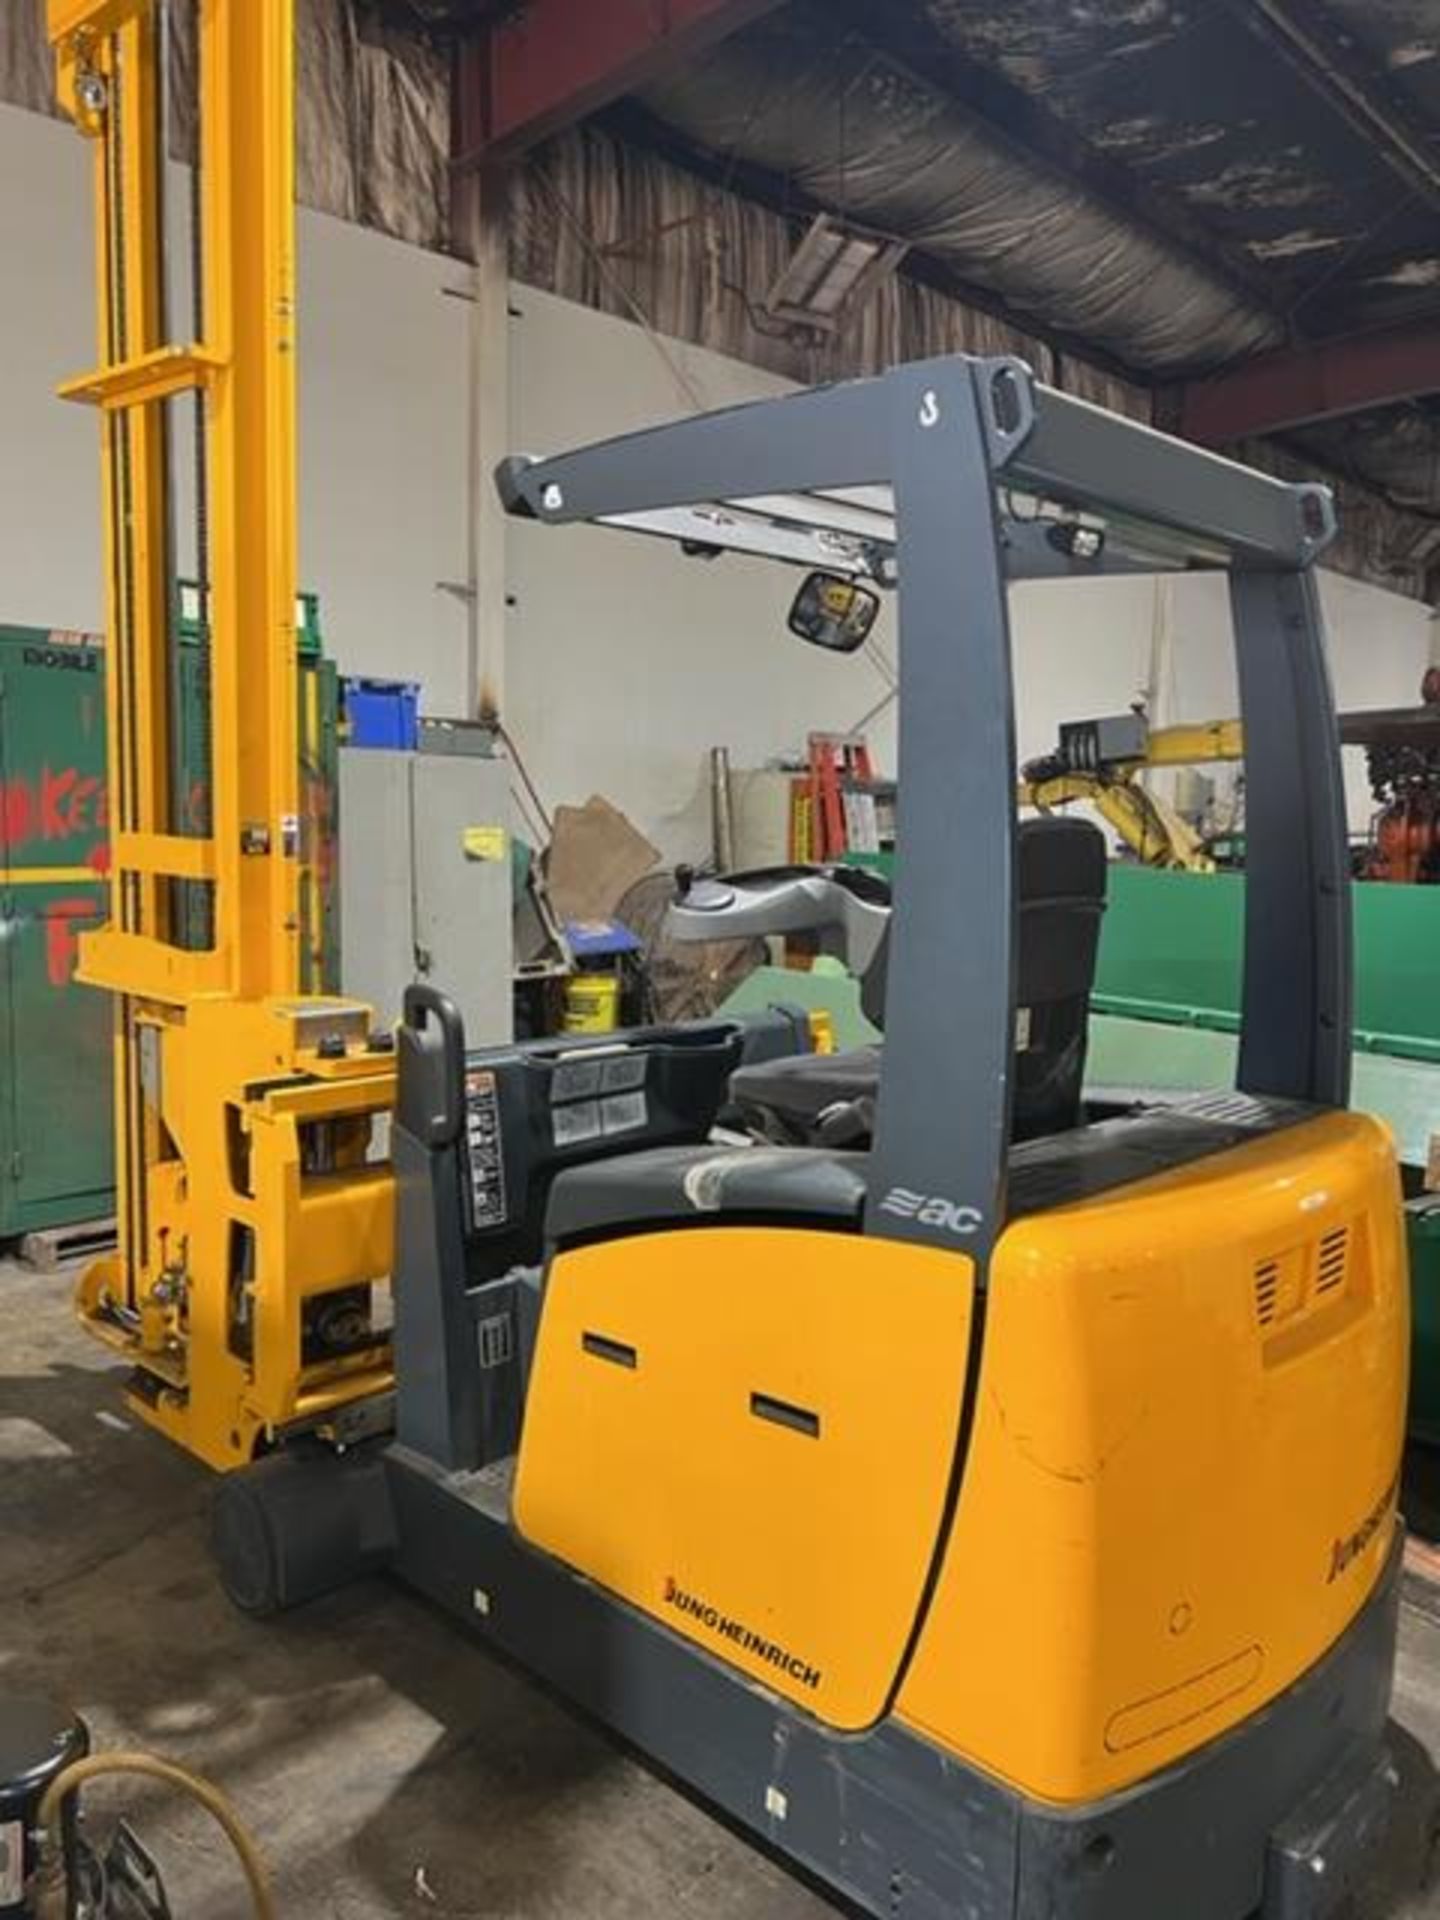 ***Clean Jungheinrich EFX410 Side-Loader Narrow Aisle Forklift Unit Electric - Electrical Issues